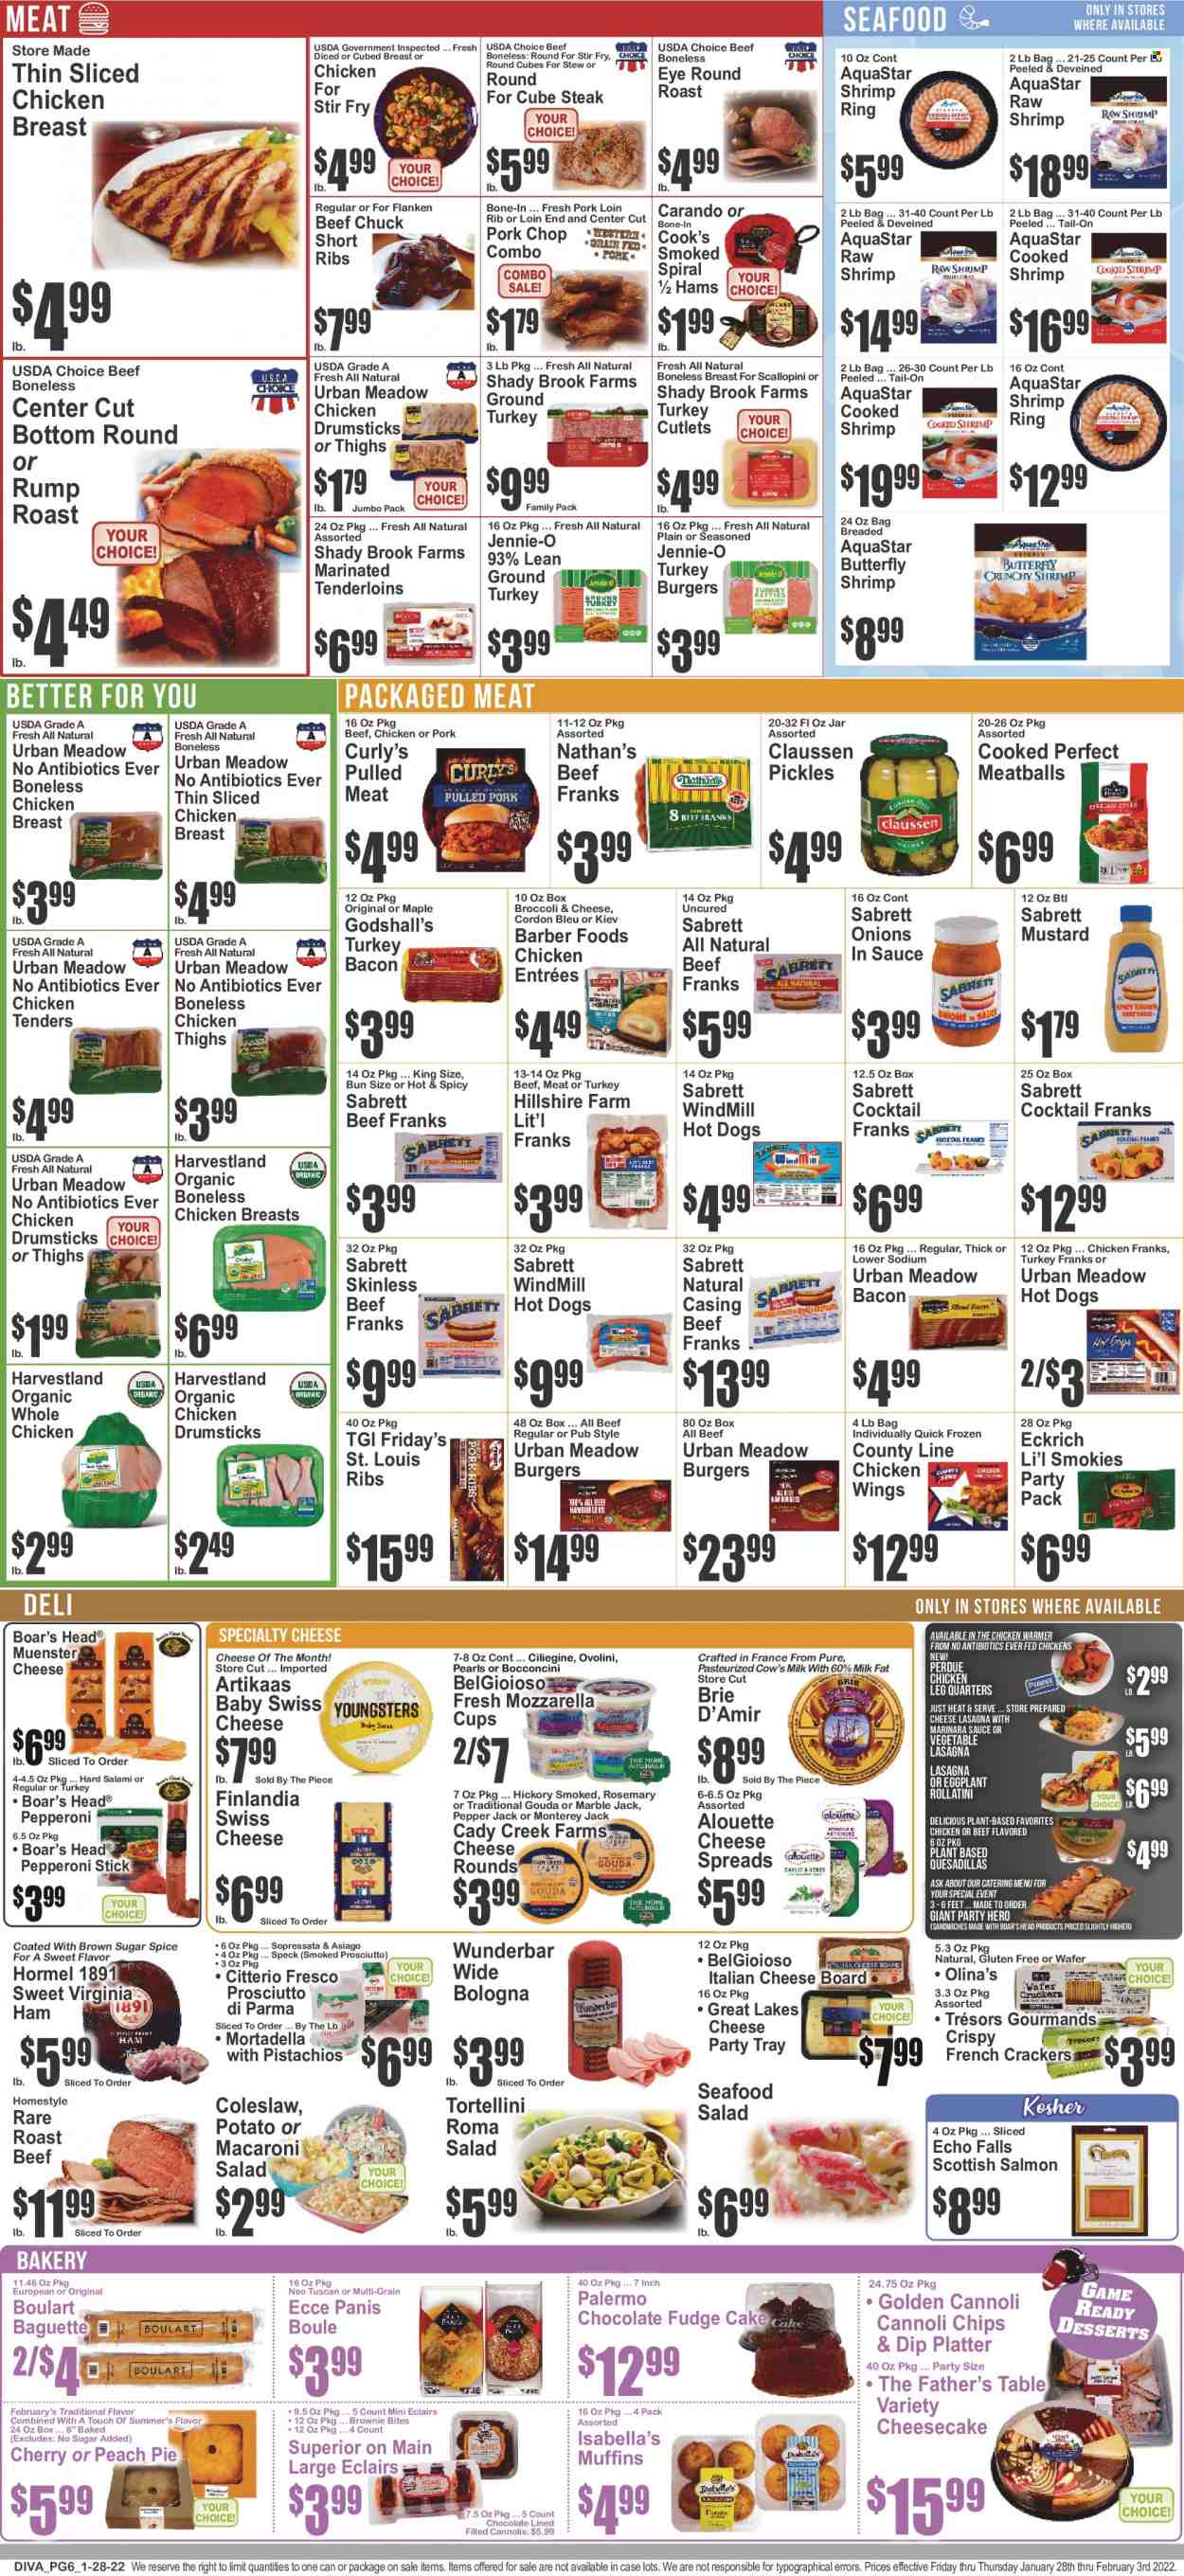 thumbnail - Key Food Flyer - 01/28/2022 - 02/03/2022 - Sales products - baguette, cake, pie, Father's Table, cheesecake, brownies, muffin, broccoli, onion, salad, eggplant, cherries, salmon, seafood, shrimps, coleslaw, hot dog, chicken tenders, meatballs, sandwich, hamburger, tortellini, lasagna meal, Perdue®, Hormel, bacon, mortadella, salami, turkey bacon, ham, Hillshire Farm, prosciutto, bologna sausage, virginia ham, Cook's, pepperoni, chicken frankfurters, macaroni salad, seafood salad, asiago, bocconcini, gouda, Monterey Jack cheese, swiss cheese, Pepper Jack cheese, brie, Münster cheese, milk, dip, chicken wings, cordon bleu, fudge, wafers, chocolate, crackers, cane sugar, pickles, rosemary, spice, mustard, ground turkey, whole chicken, chicken legs, chicken thighs, chicken drumsticks, beef meat, steak, round roast, roast beef, turkey burger, pork chops, pork loin, pork meat, cup, cheese board. Page 6.